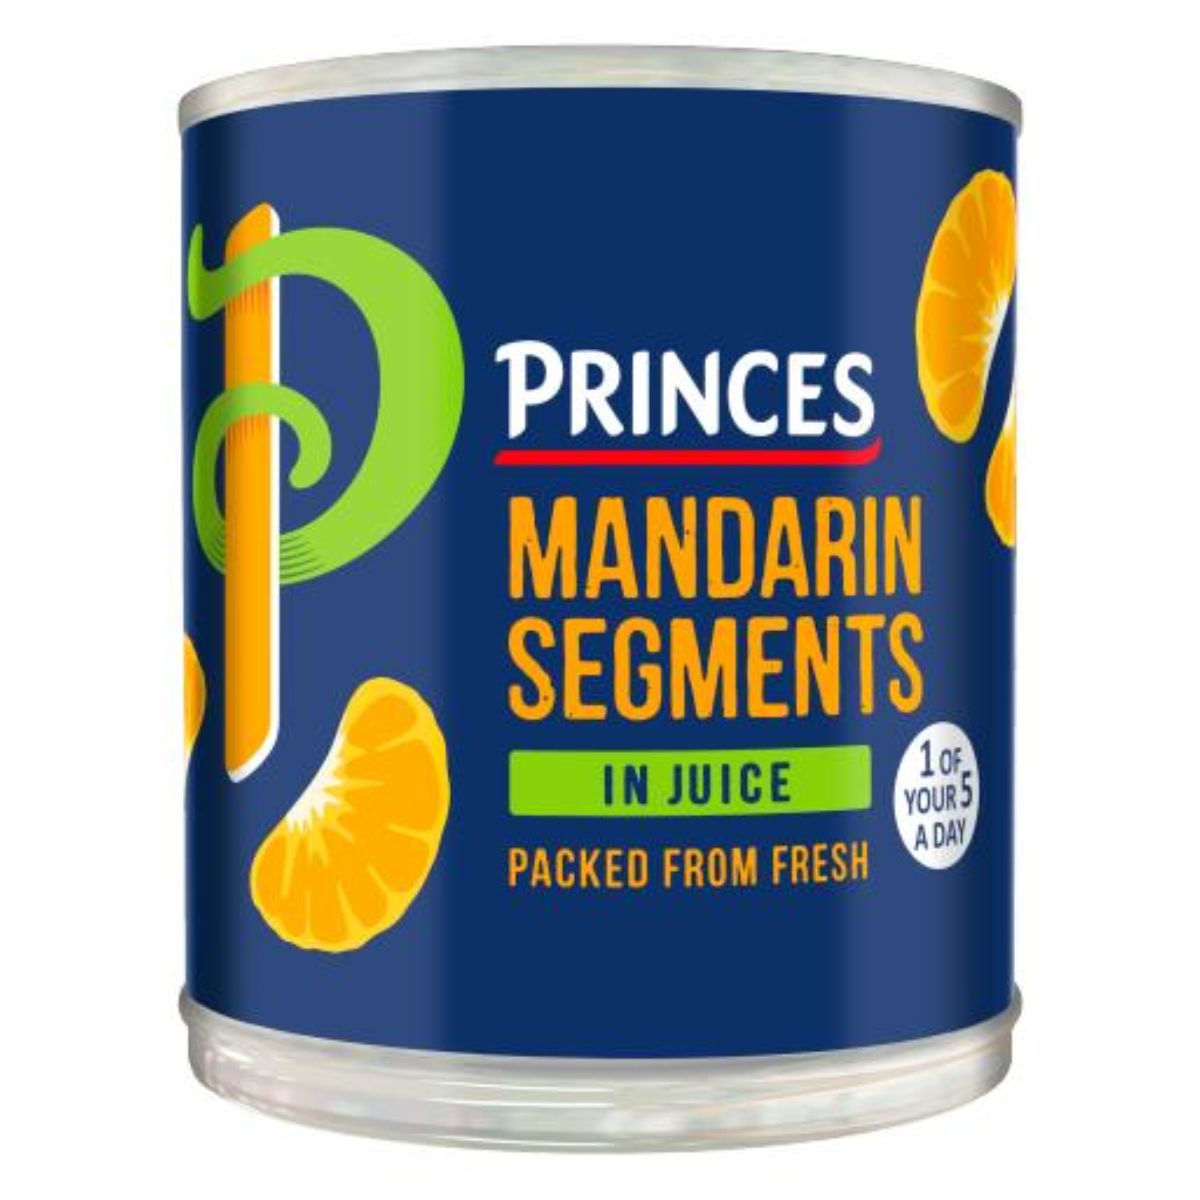 A cylindrical can labeled "Princes - Mandarin In Juice - 298g" with images of orange mandarin slices and a bright blue and green design.